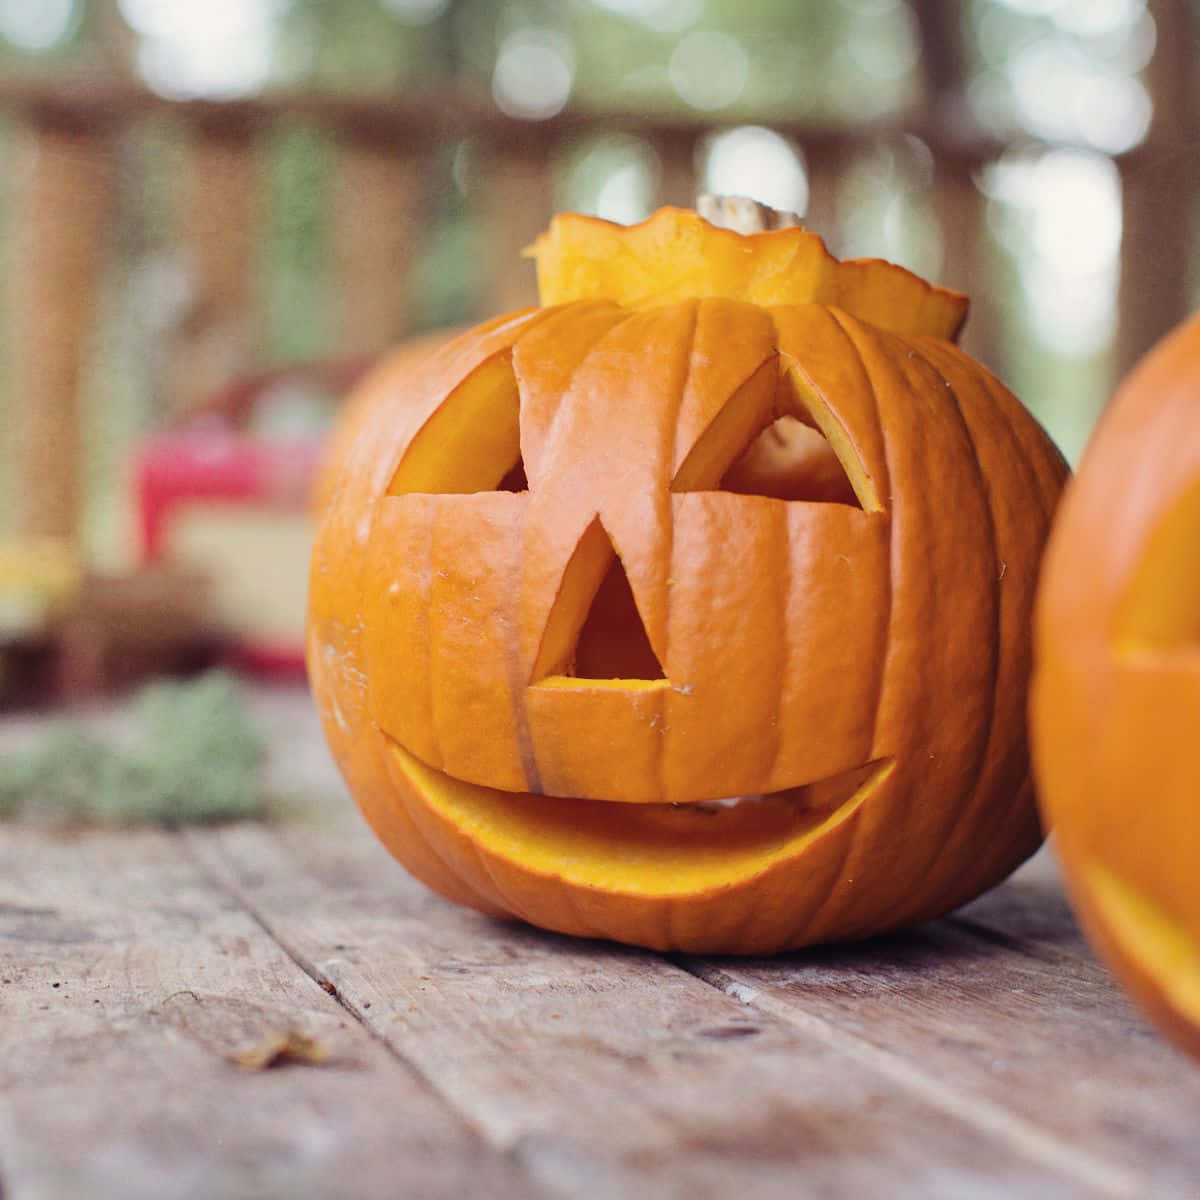 Download Halloween Pumpkin Pretty Carving Picture | Wallpapers.com